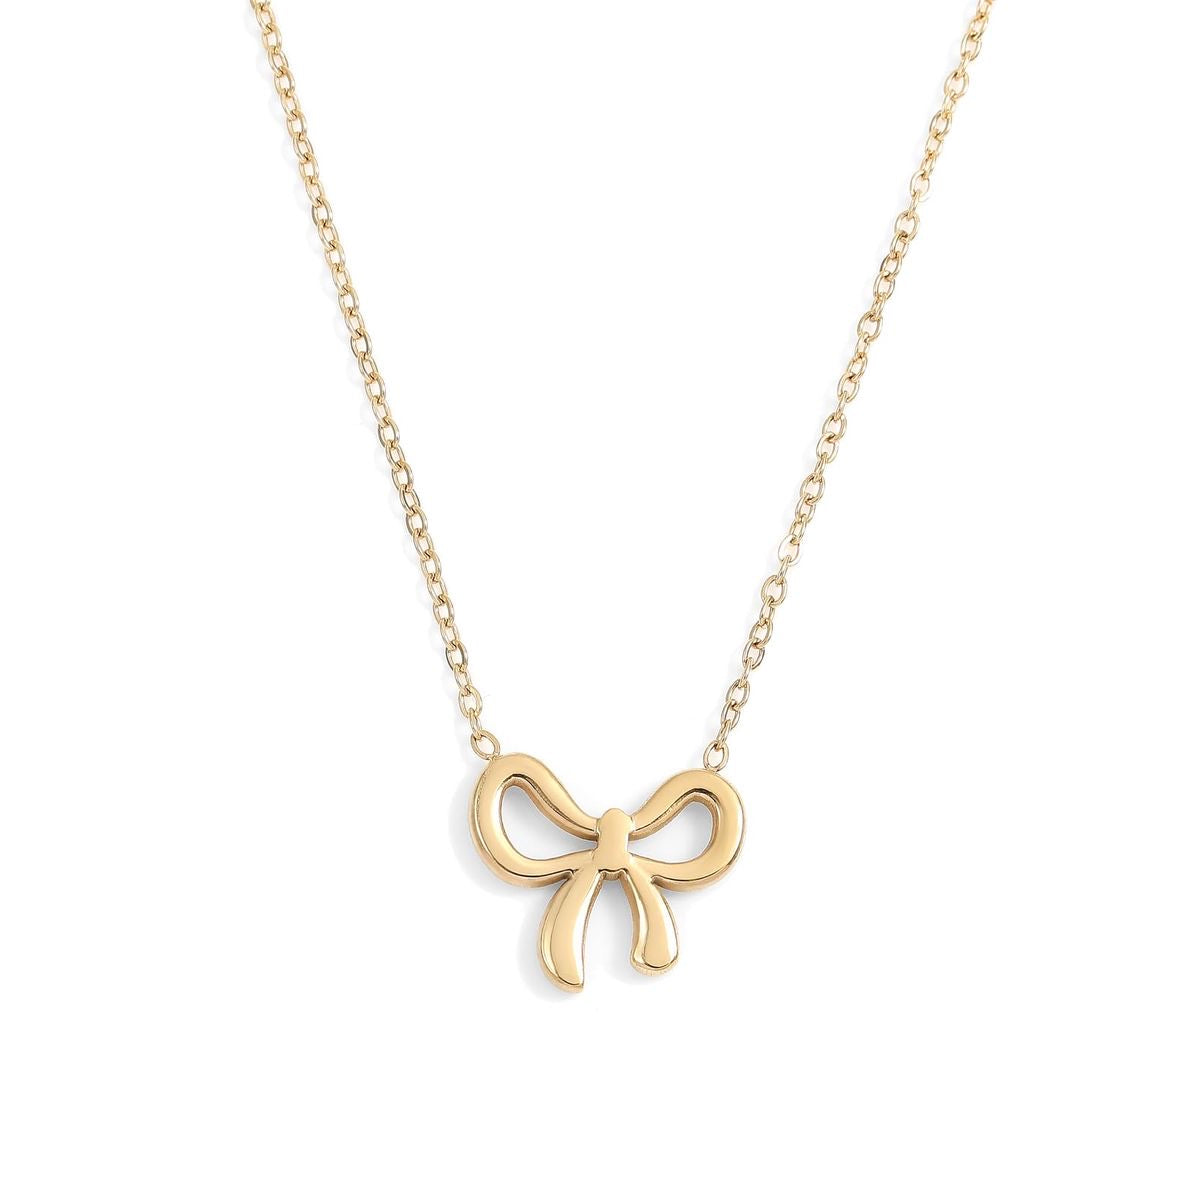 Marin bow necklace